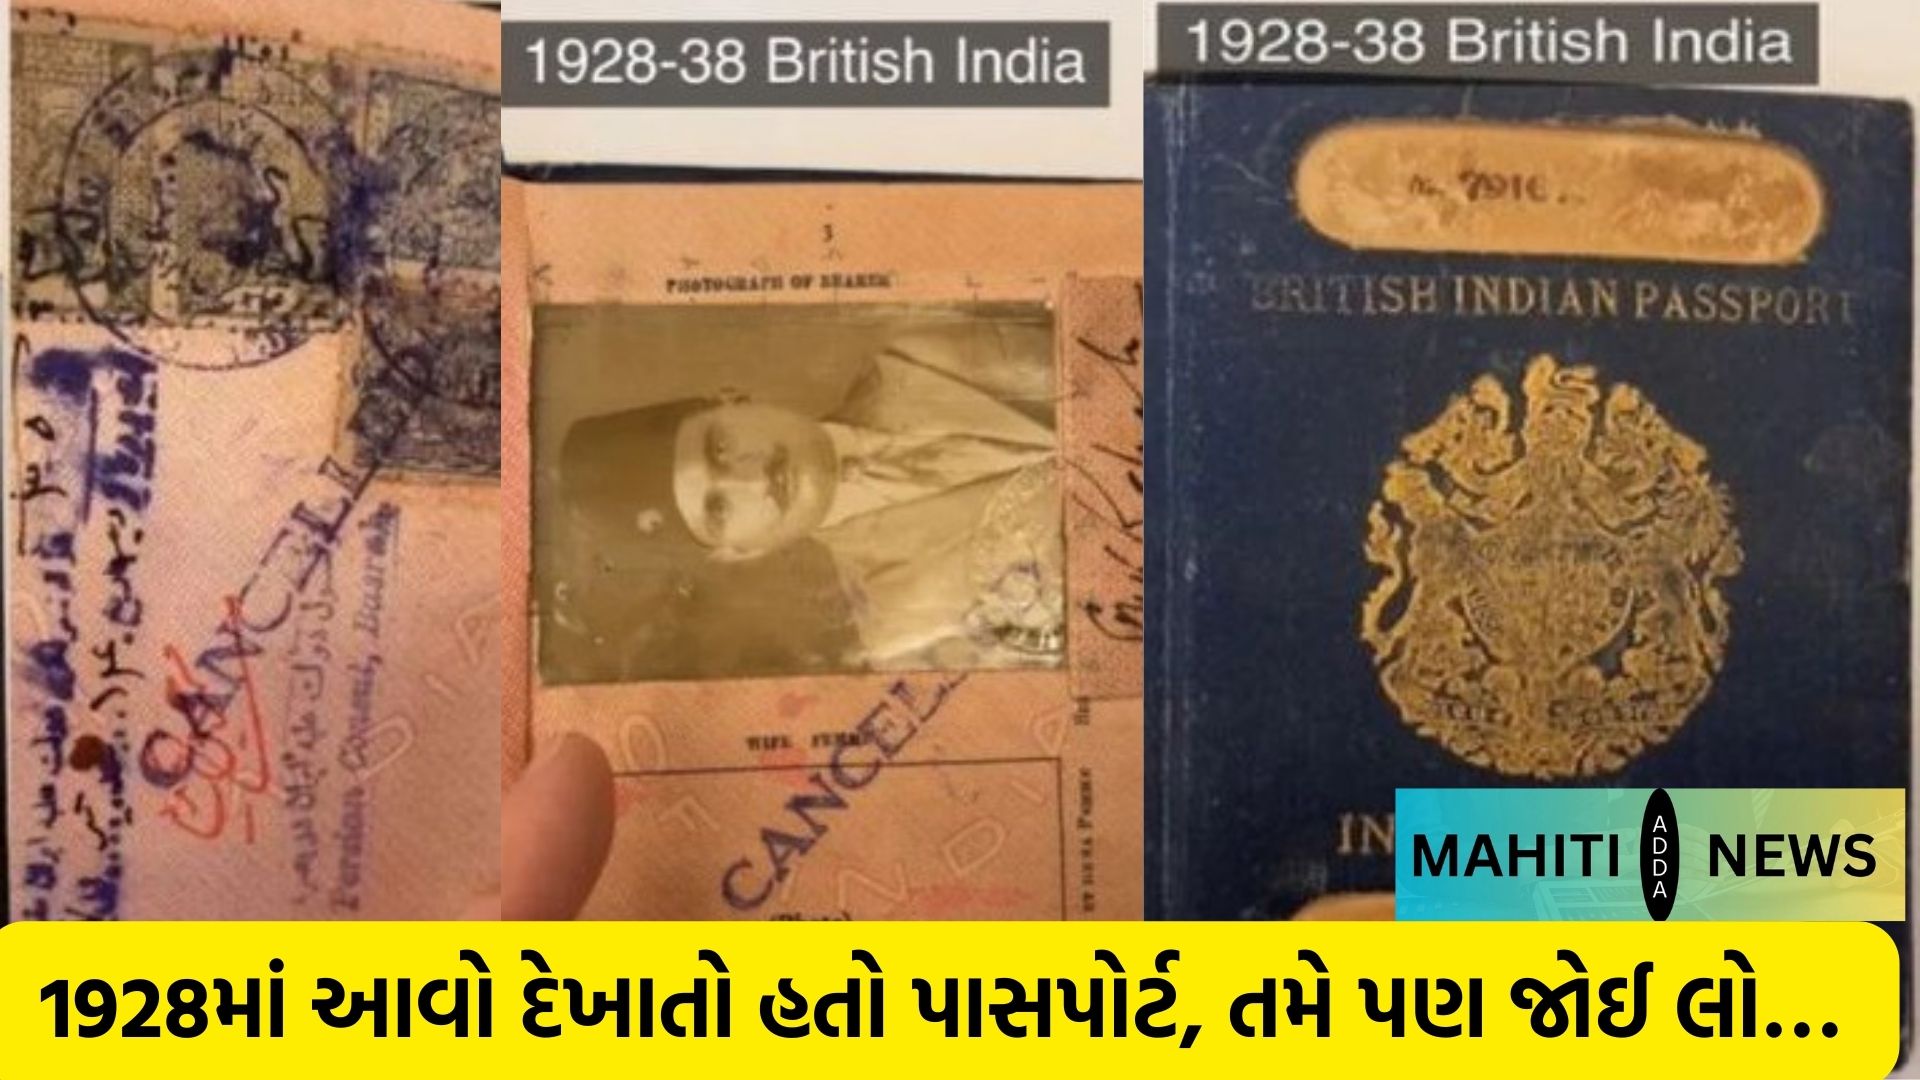 passport looked like in 1928